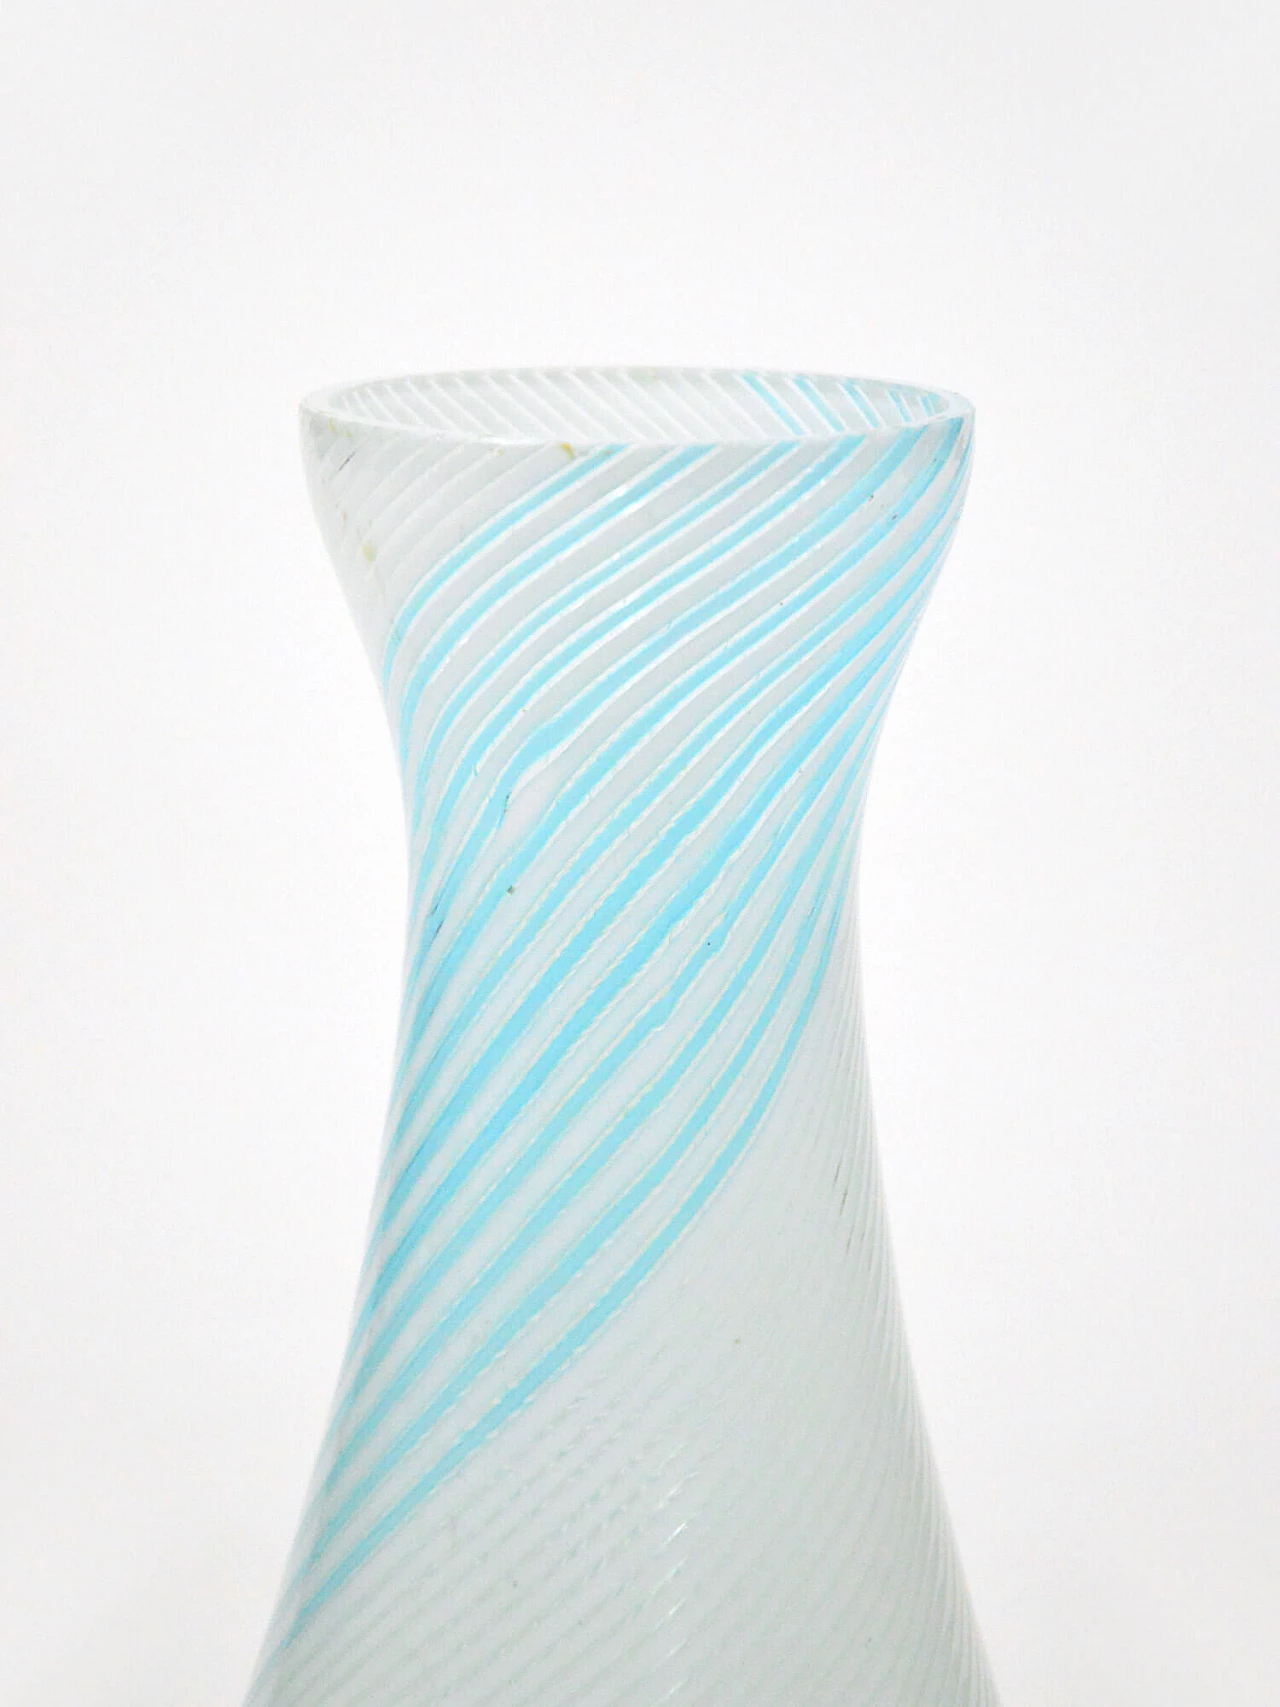 Murano glass vase by Dino Martens for Aureliano Toso, 1950s 7